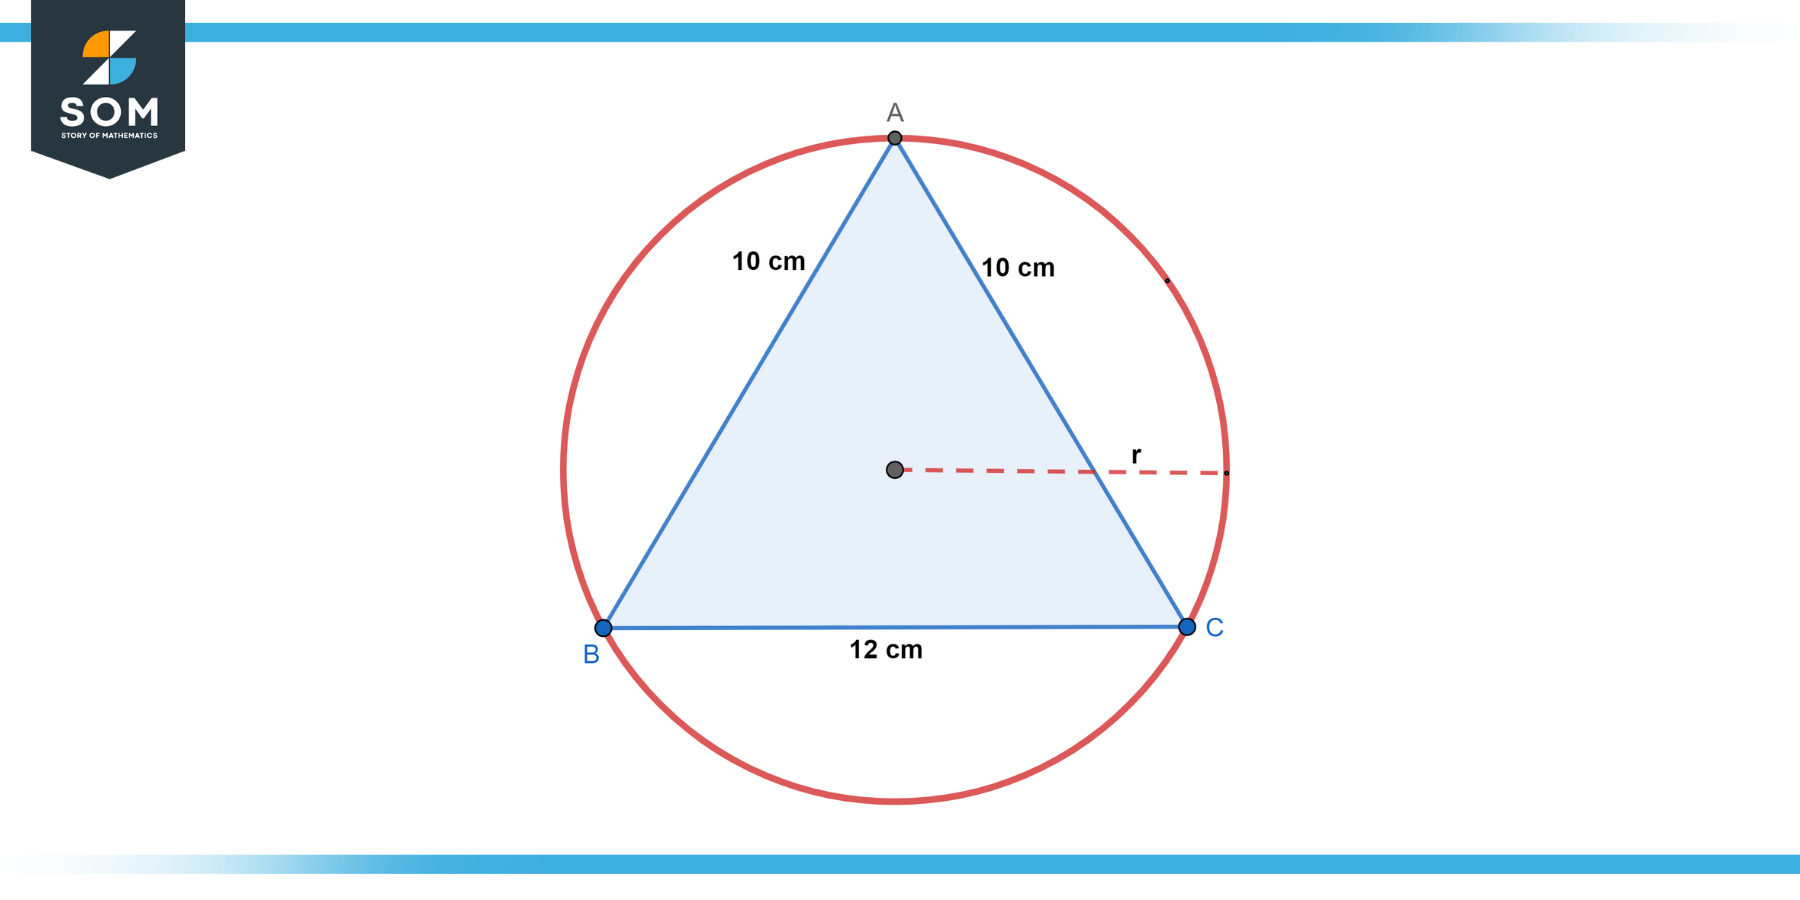 Isosceles triangle ABC with base equals 12cm and each side equals 10cm inside a circle